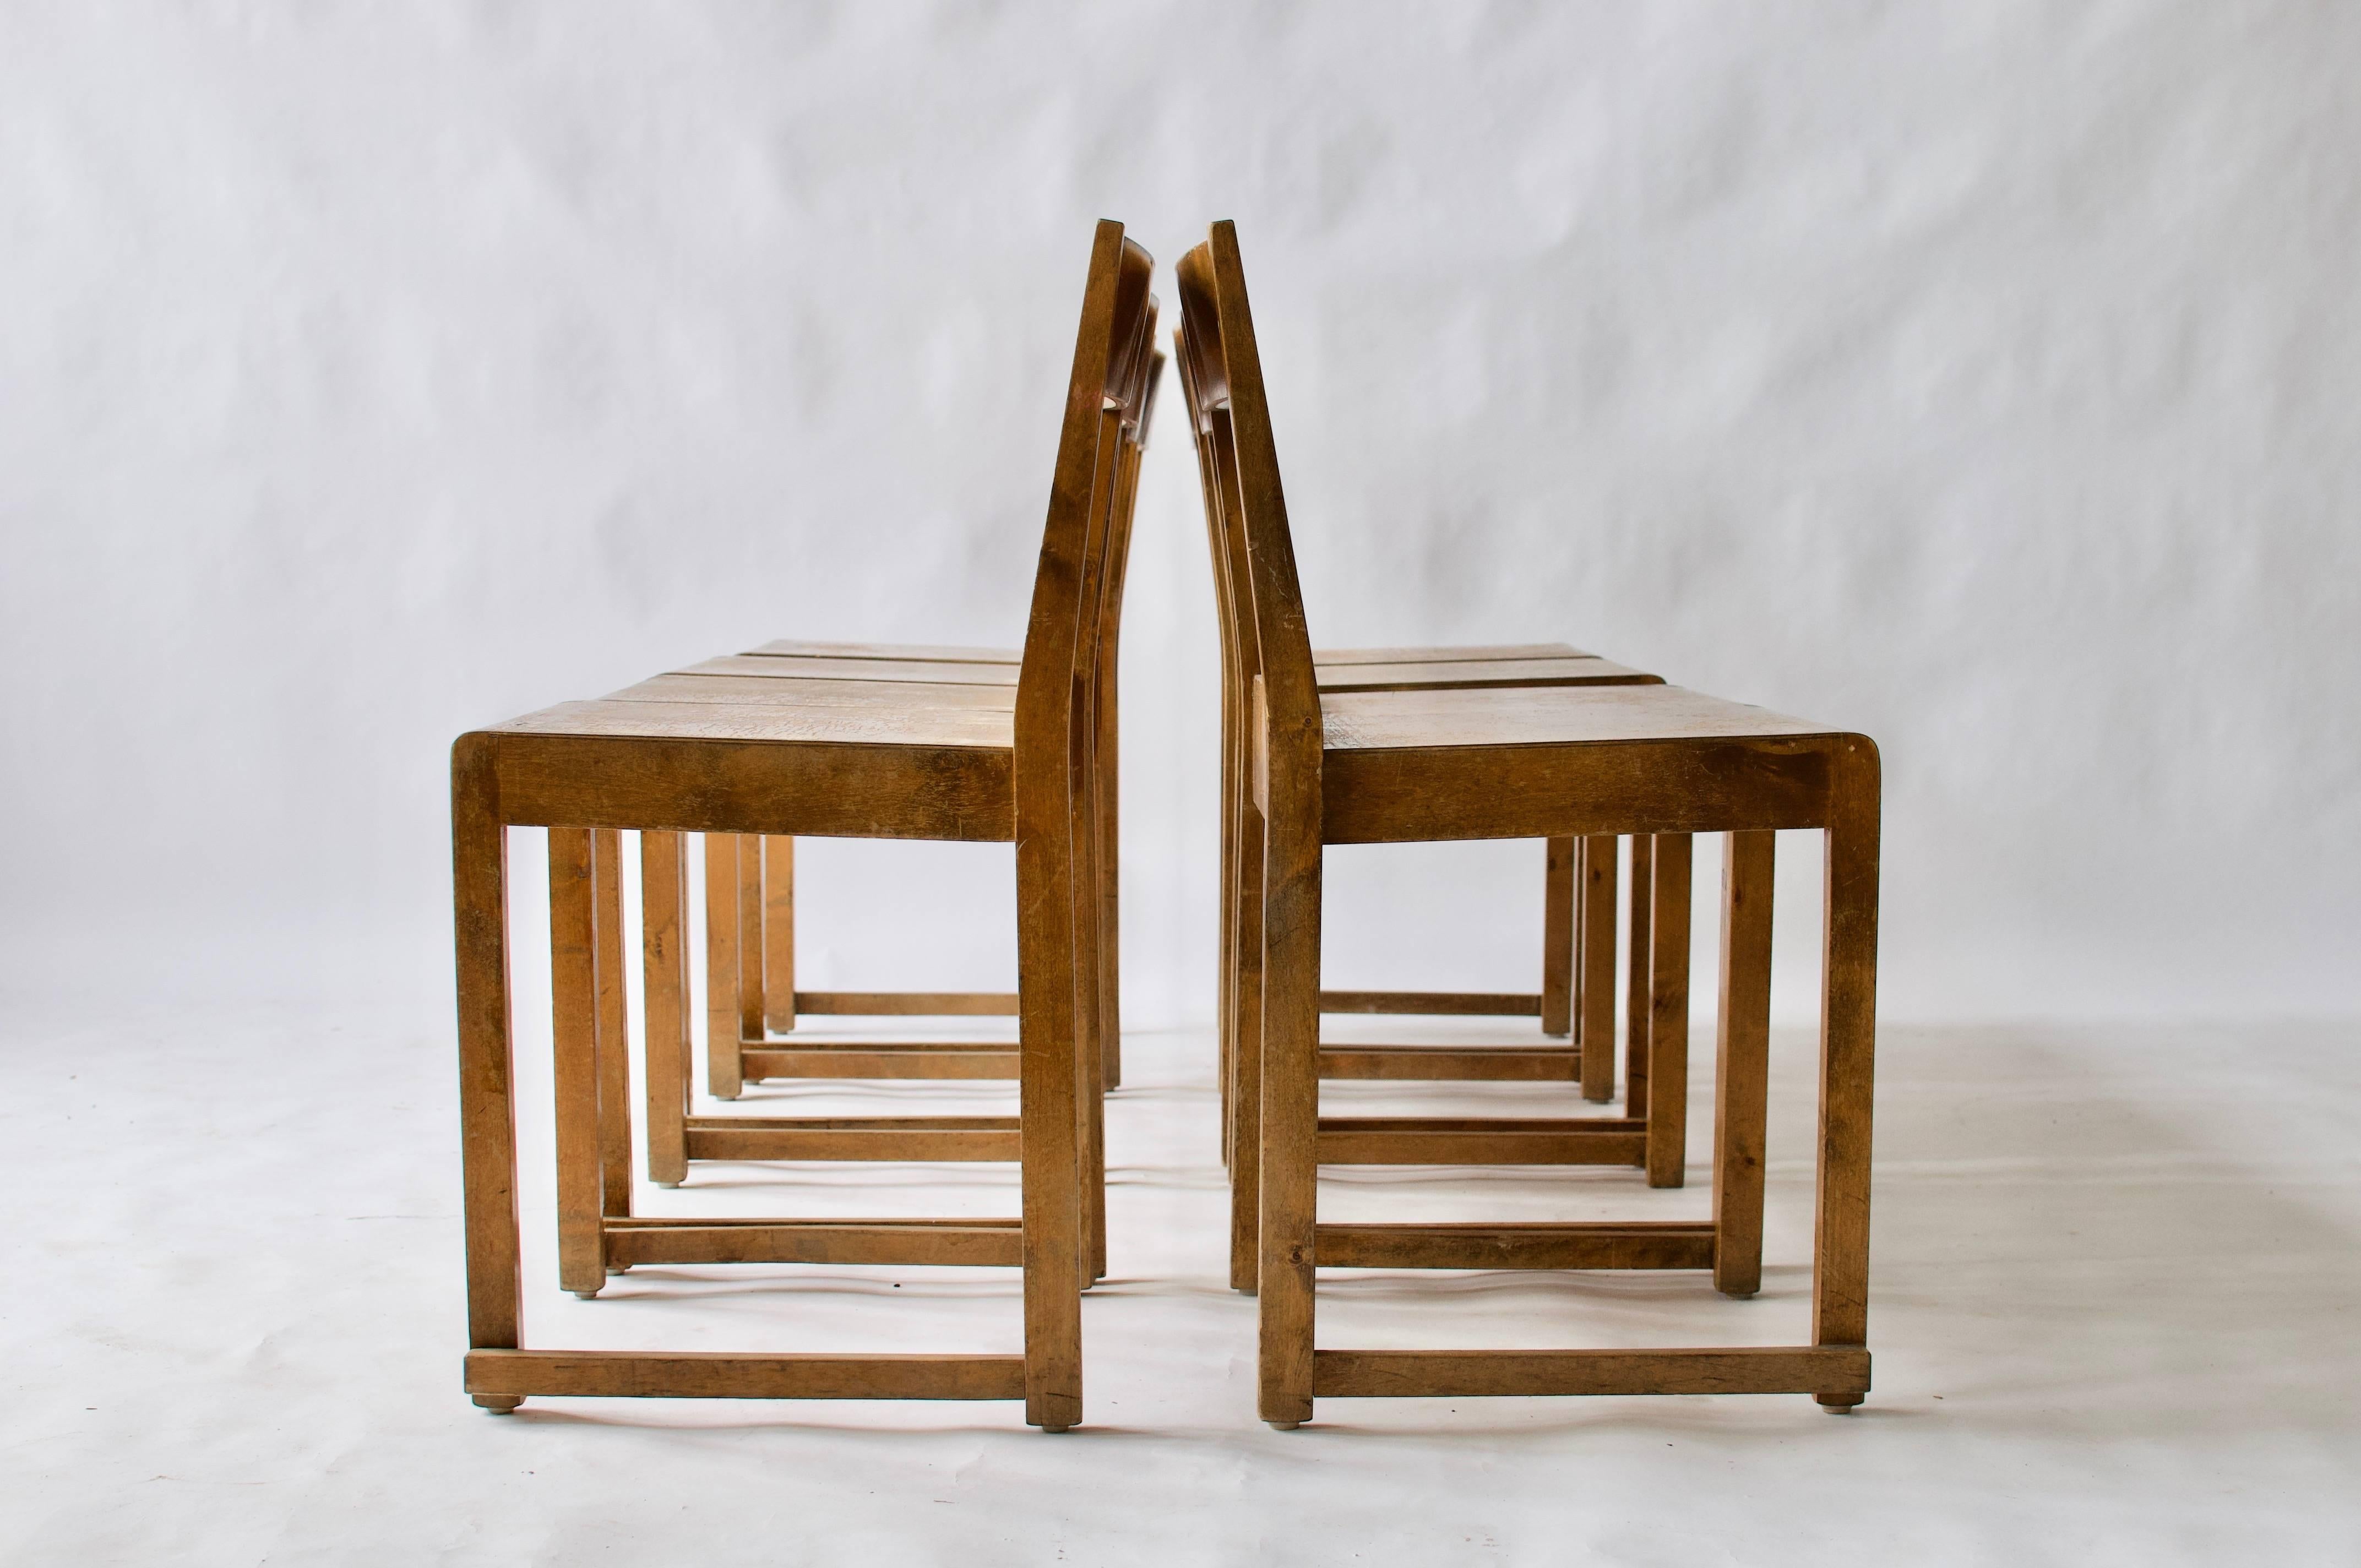 Set of eight stacking dining chairs designed by the Swedish architect Sven Markelius for the Helsingborg theatre in 1932.